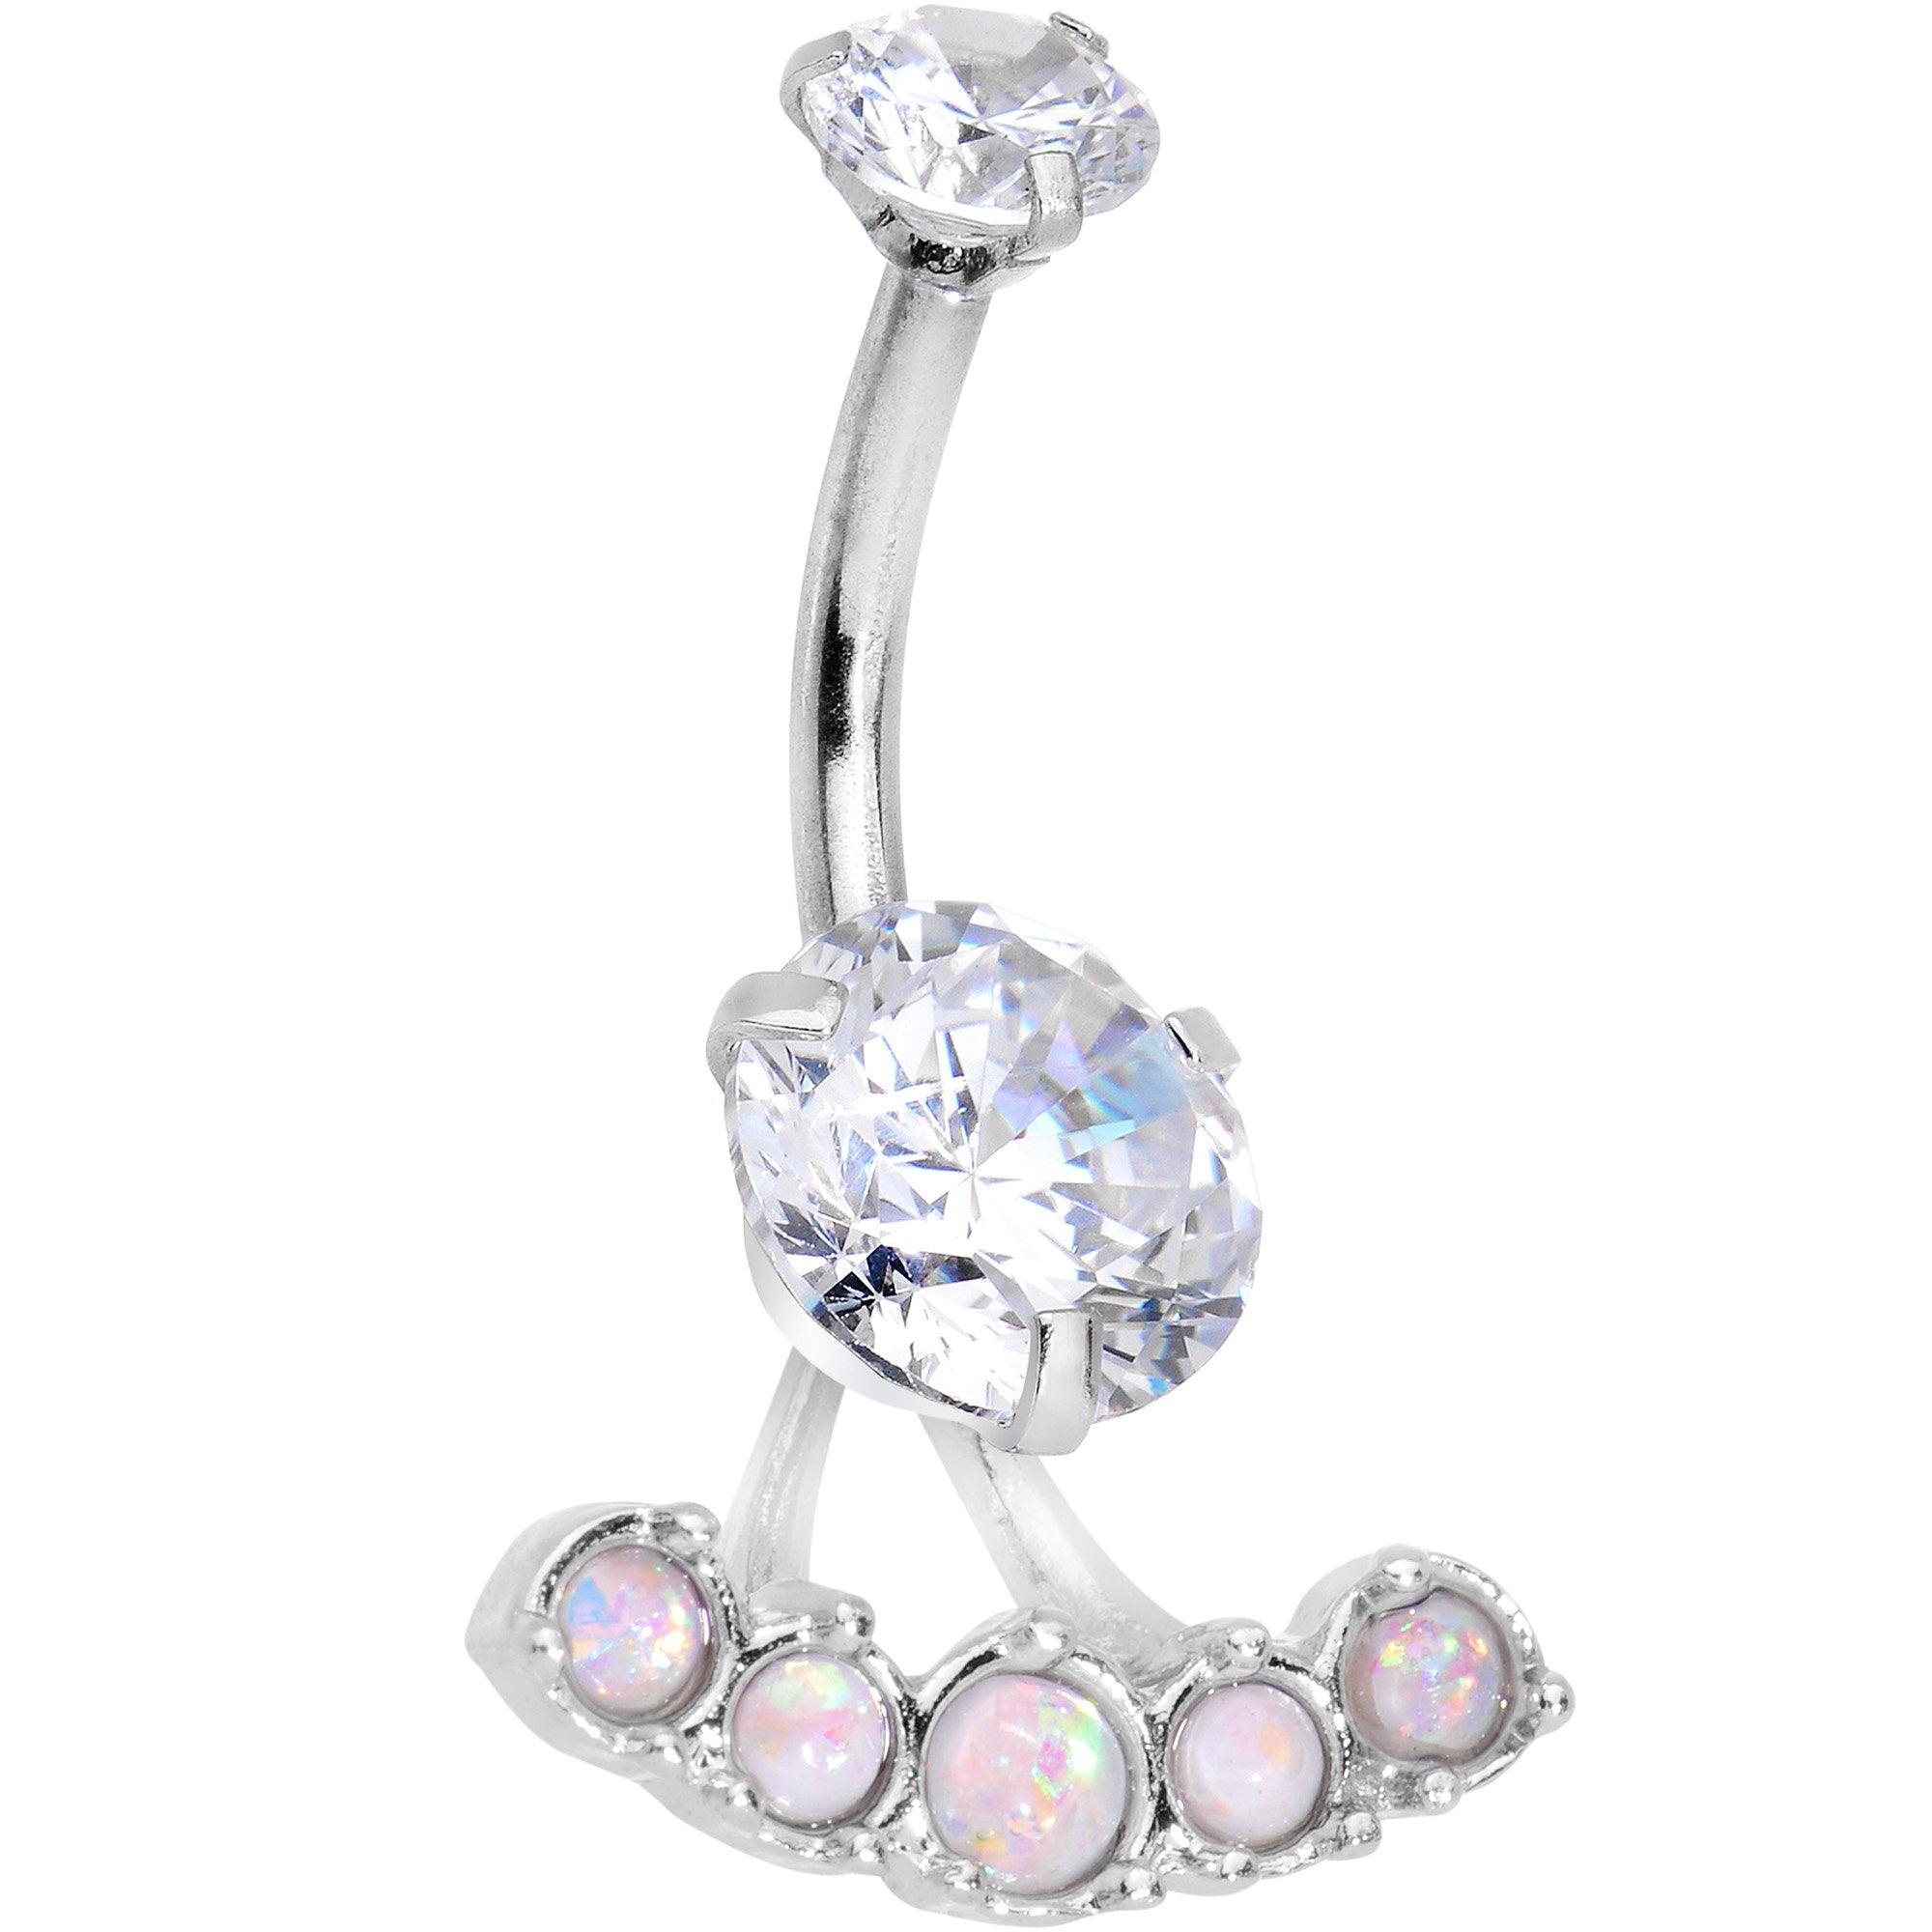 White Faux Opal Clear CZ Gem Sassy Fashions Dangle Belly Ring